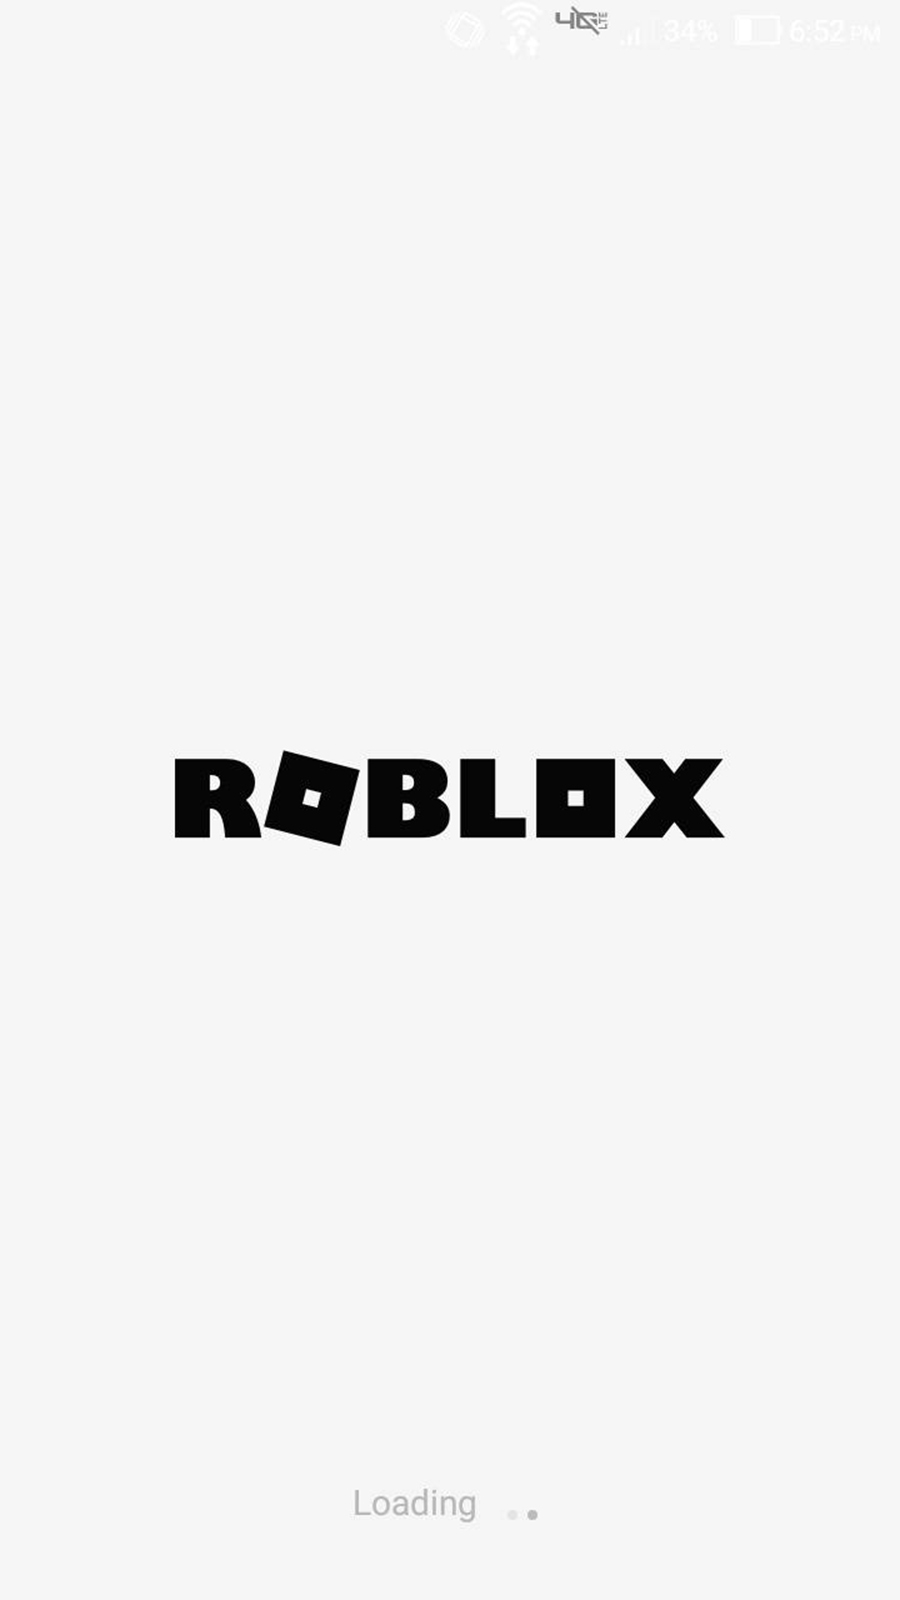 Roblox Roblox Game Wallpapers Now Download For Your Device Best Wallpapers - gamer wallpaper roblox logo